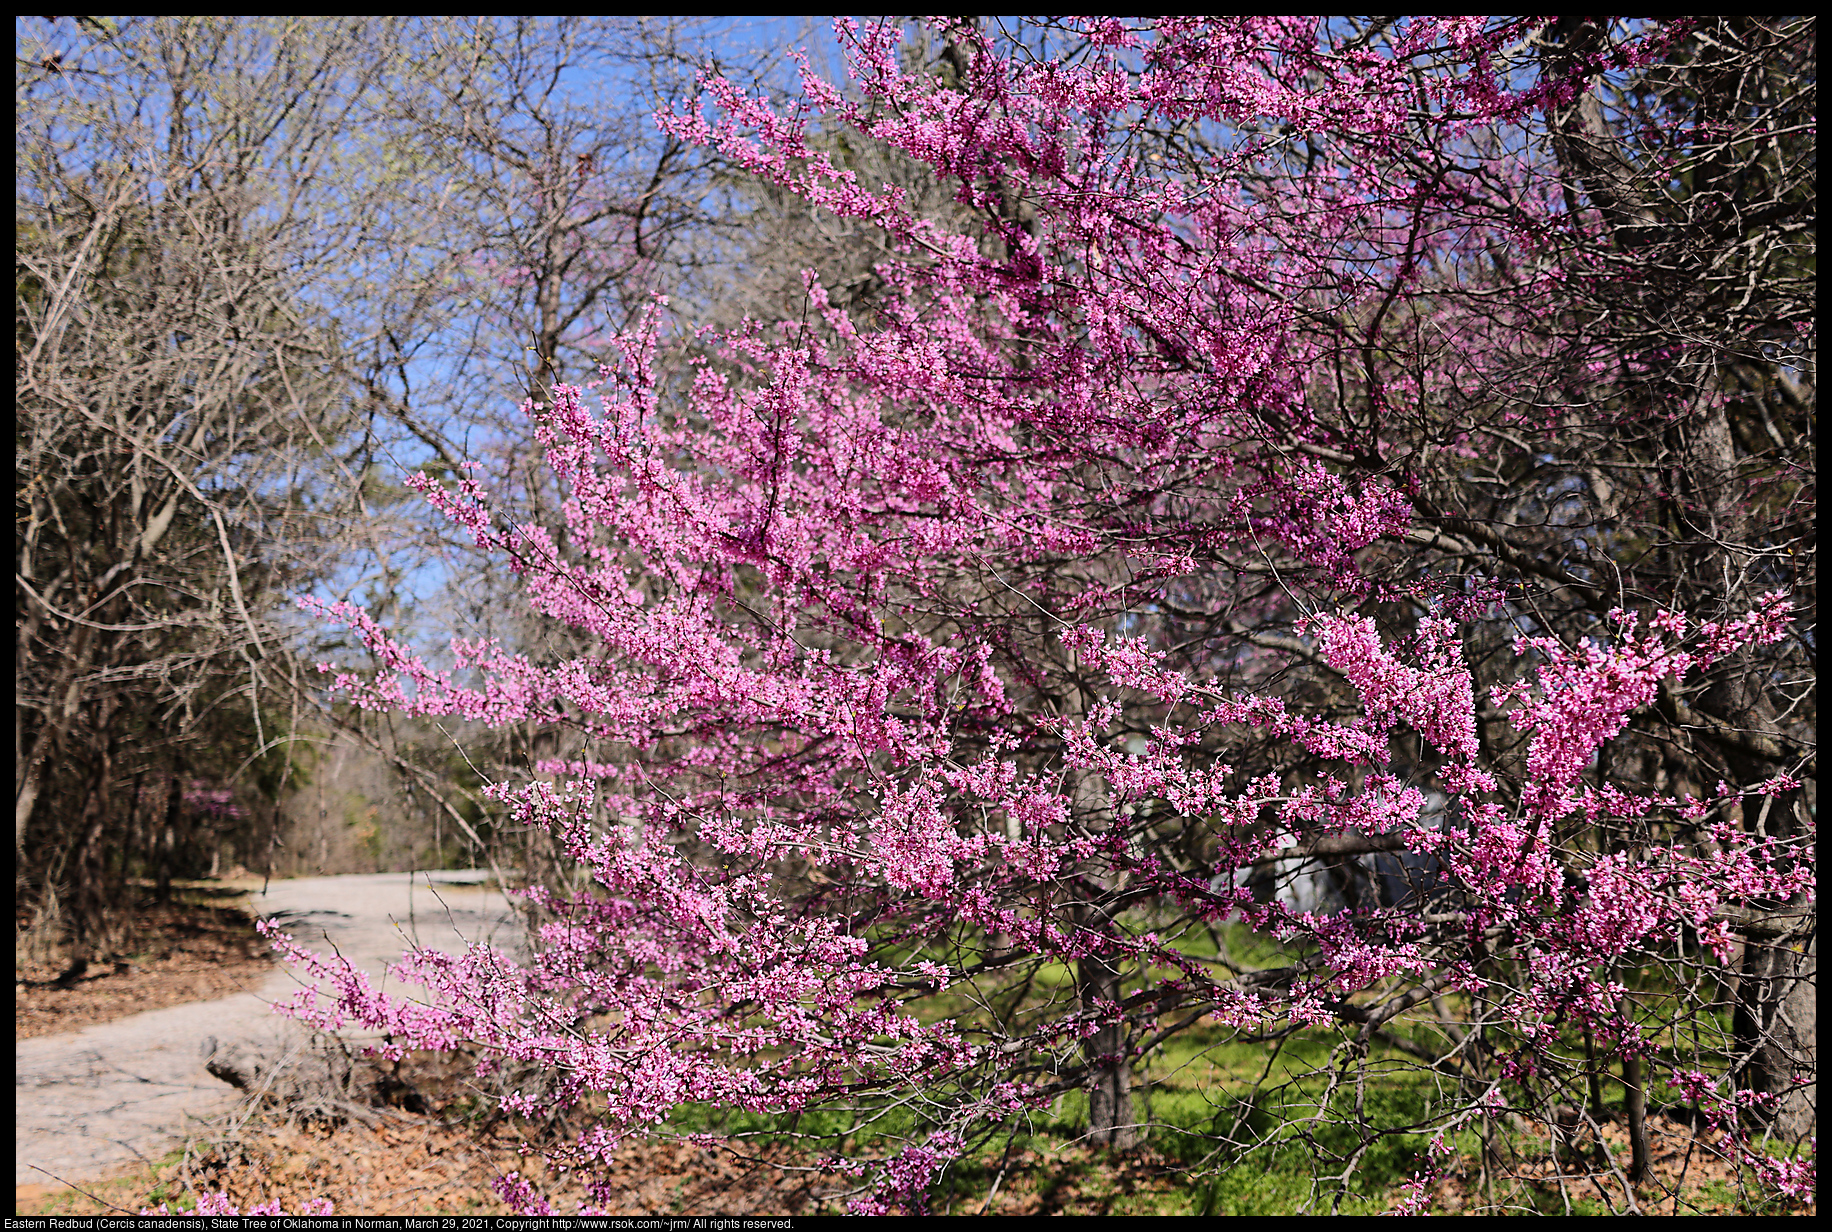 Eastern Redbud (Cercis canadensis), State Tree of Oklahoma in Norman, March 29, 2021